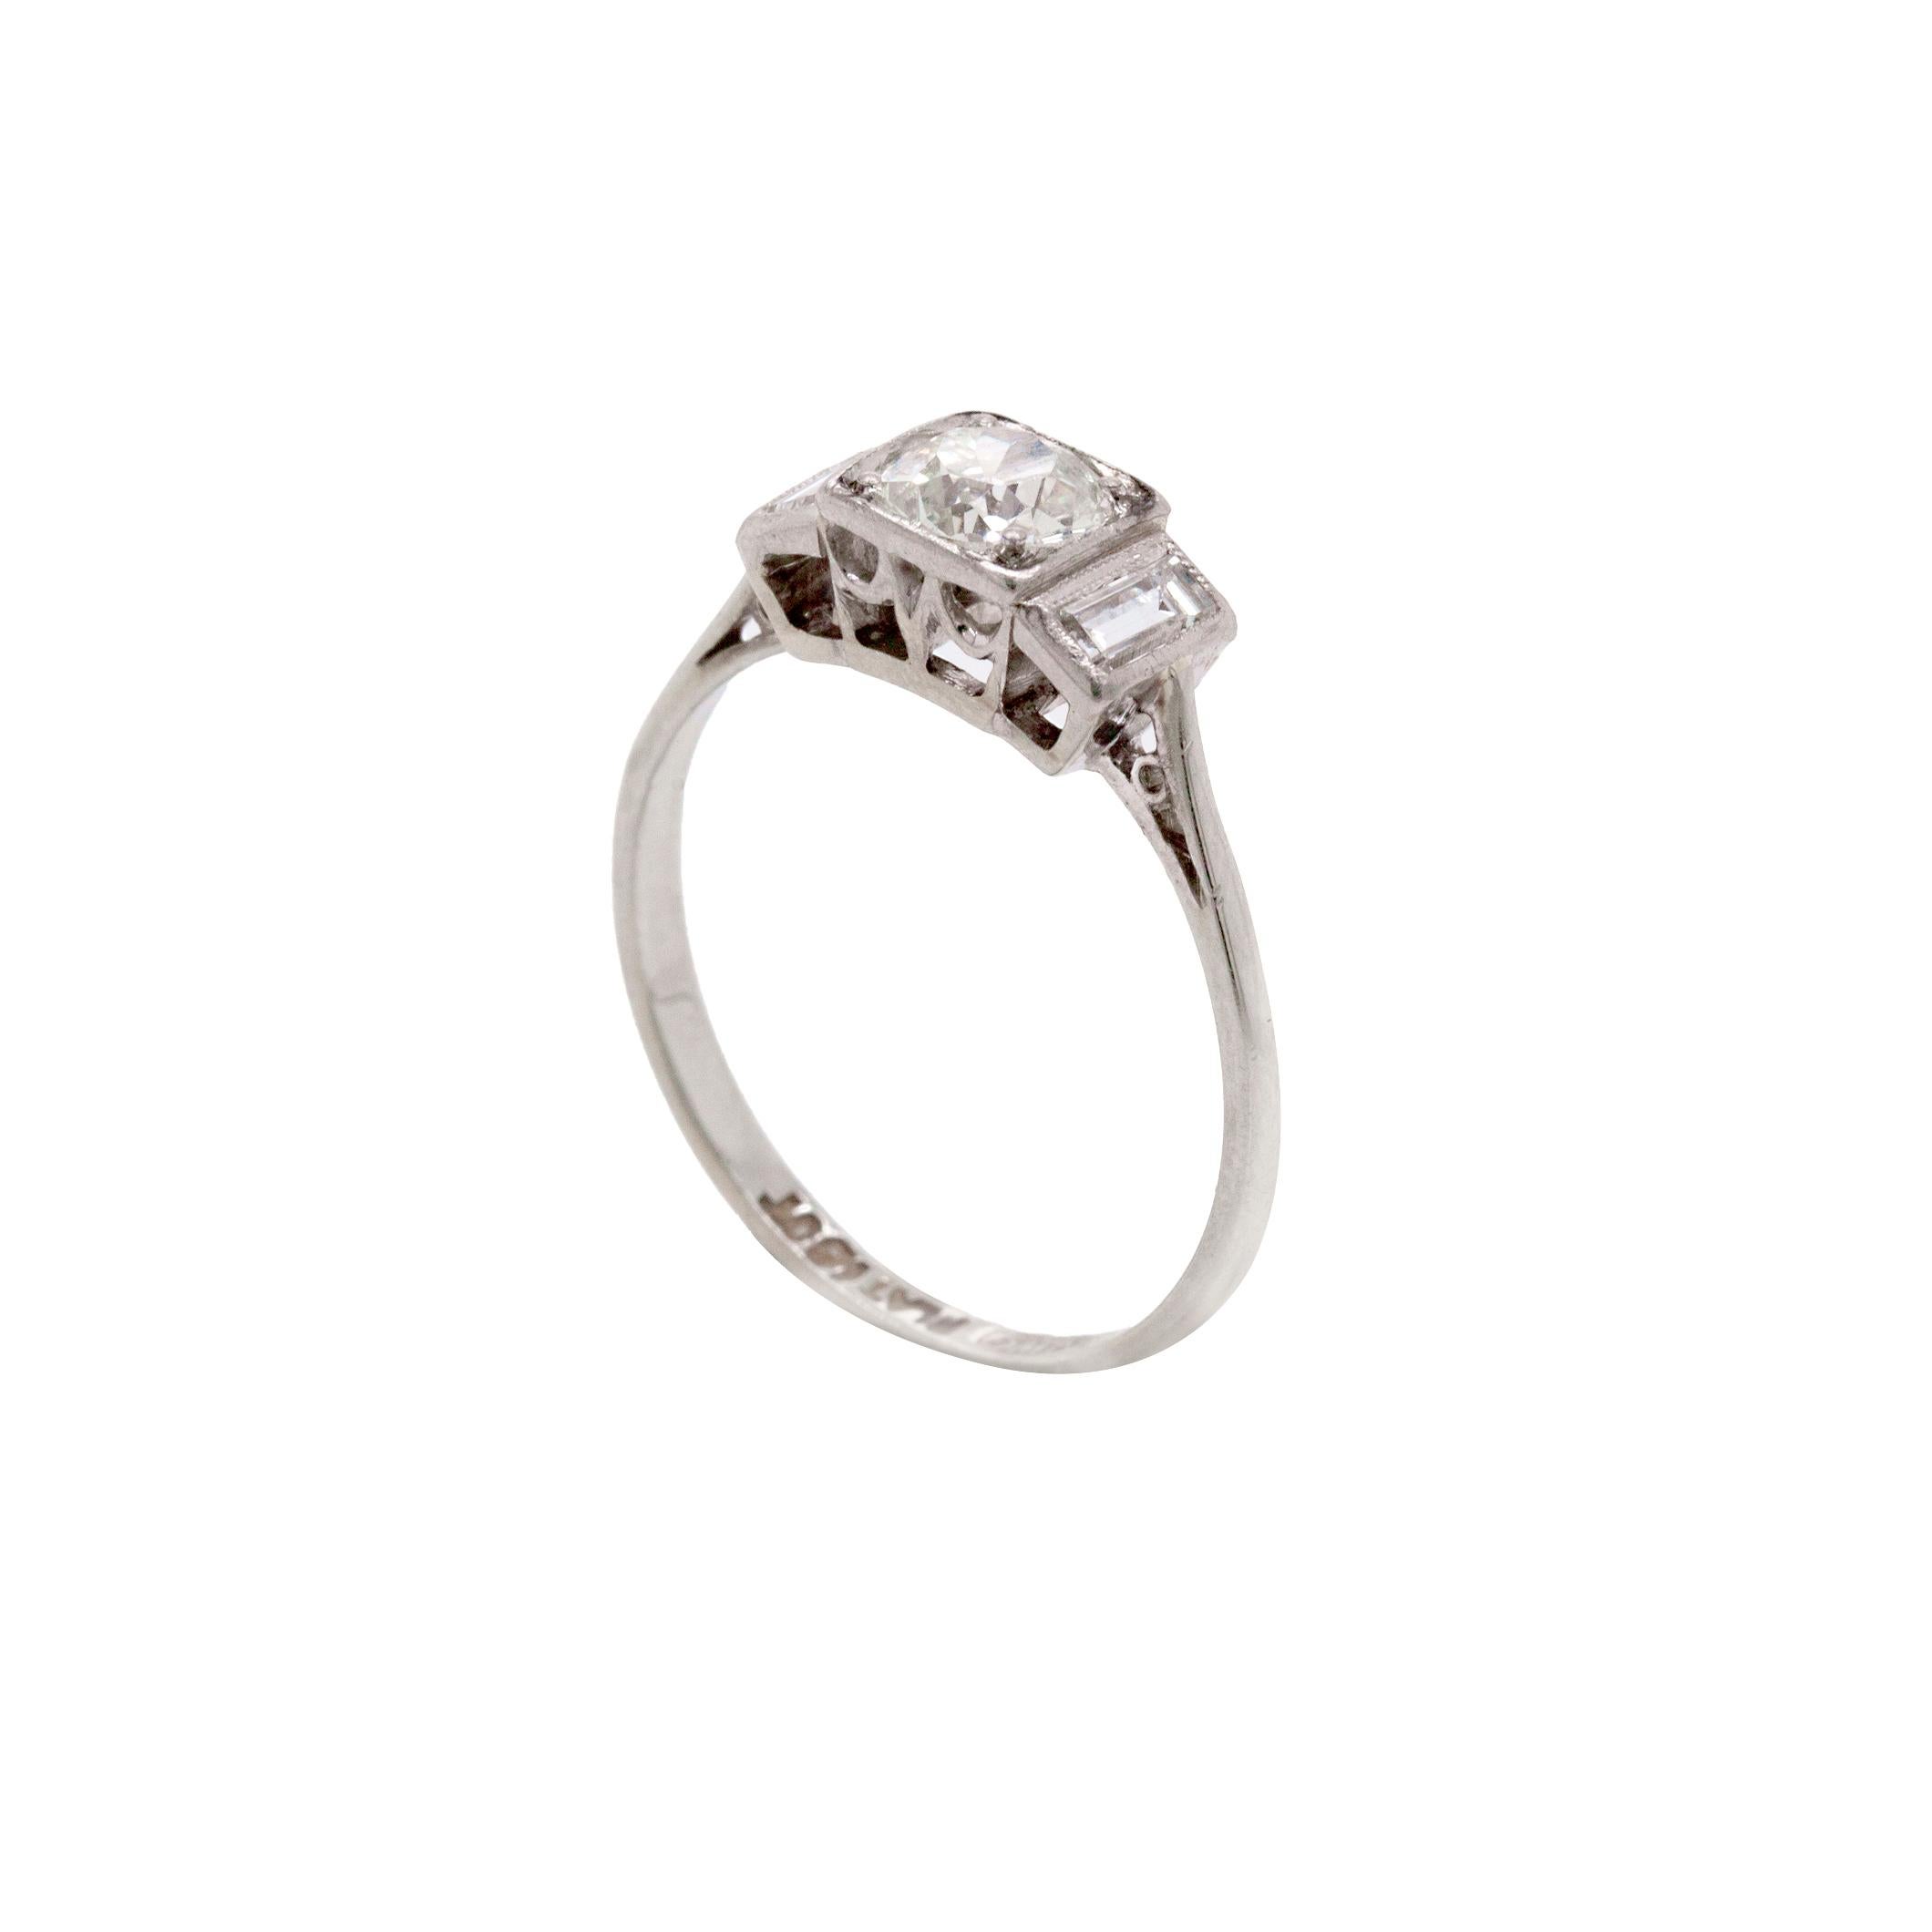 This captivating Art Deco ring is elegant in the simplicity of its design. A stunning Old Mine Cut Diamond in the centre weighs 0.56 carats, and is set in a beautiful square grain setting. It is accompanied by a gorgeous baguette cut to either side